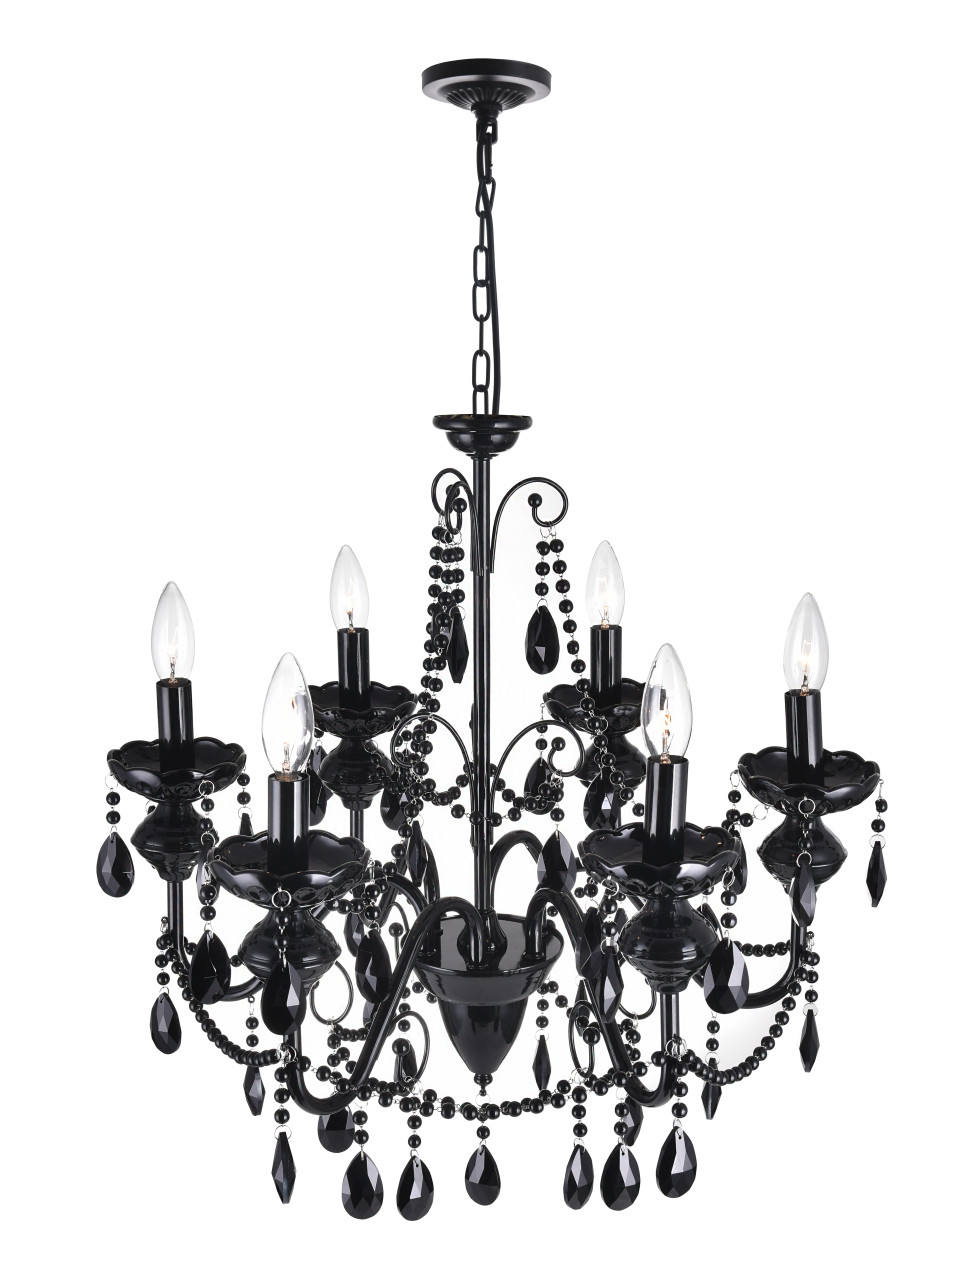 CWI LIGHTING 5095P22B-6 6 Light Up Chandelier with Black finish